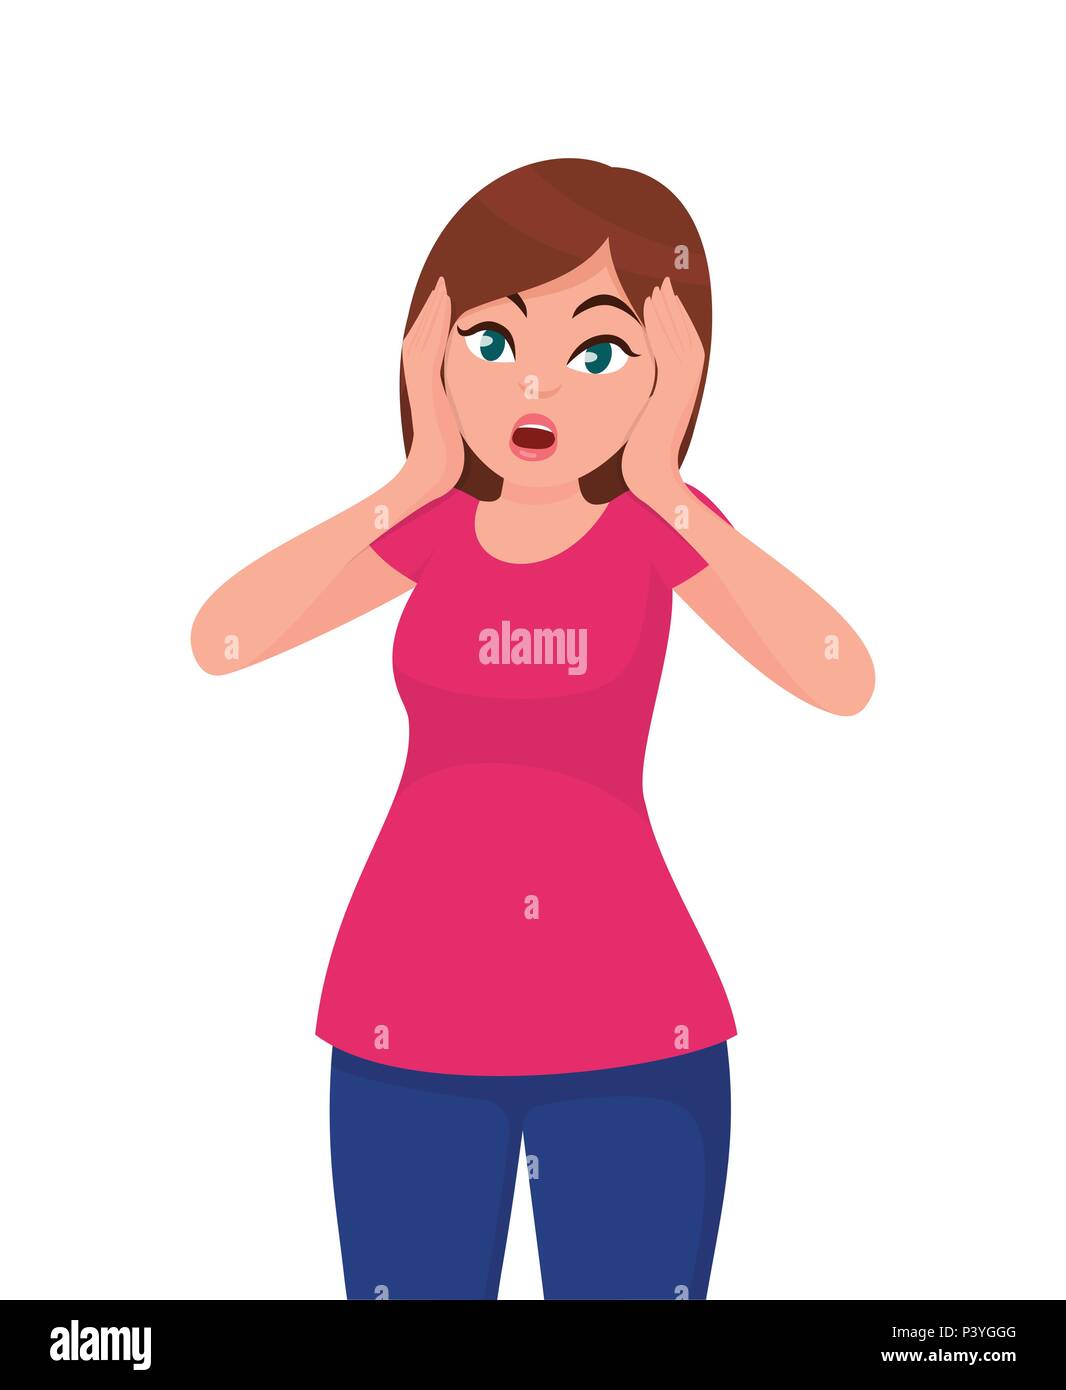 Woman with scared face expression, Young  woman expression with her hands on the head. Cartoon style illustration. Stock Vector